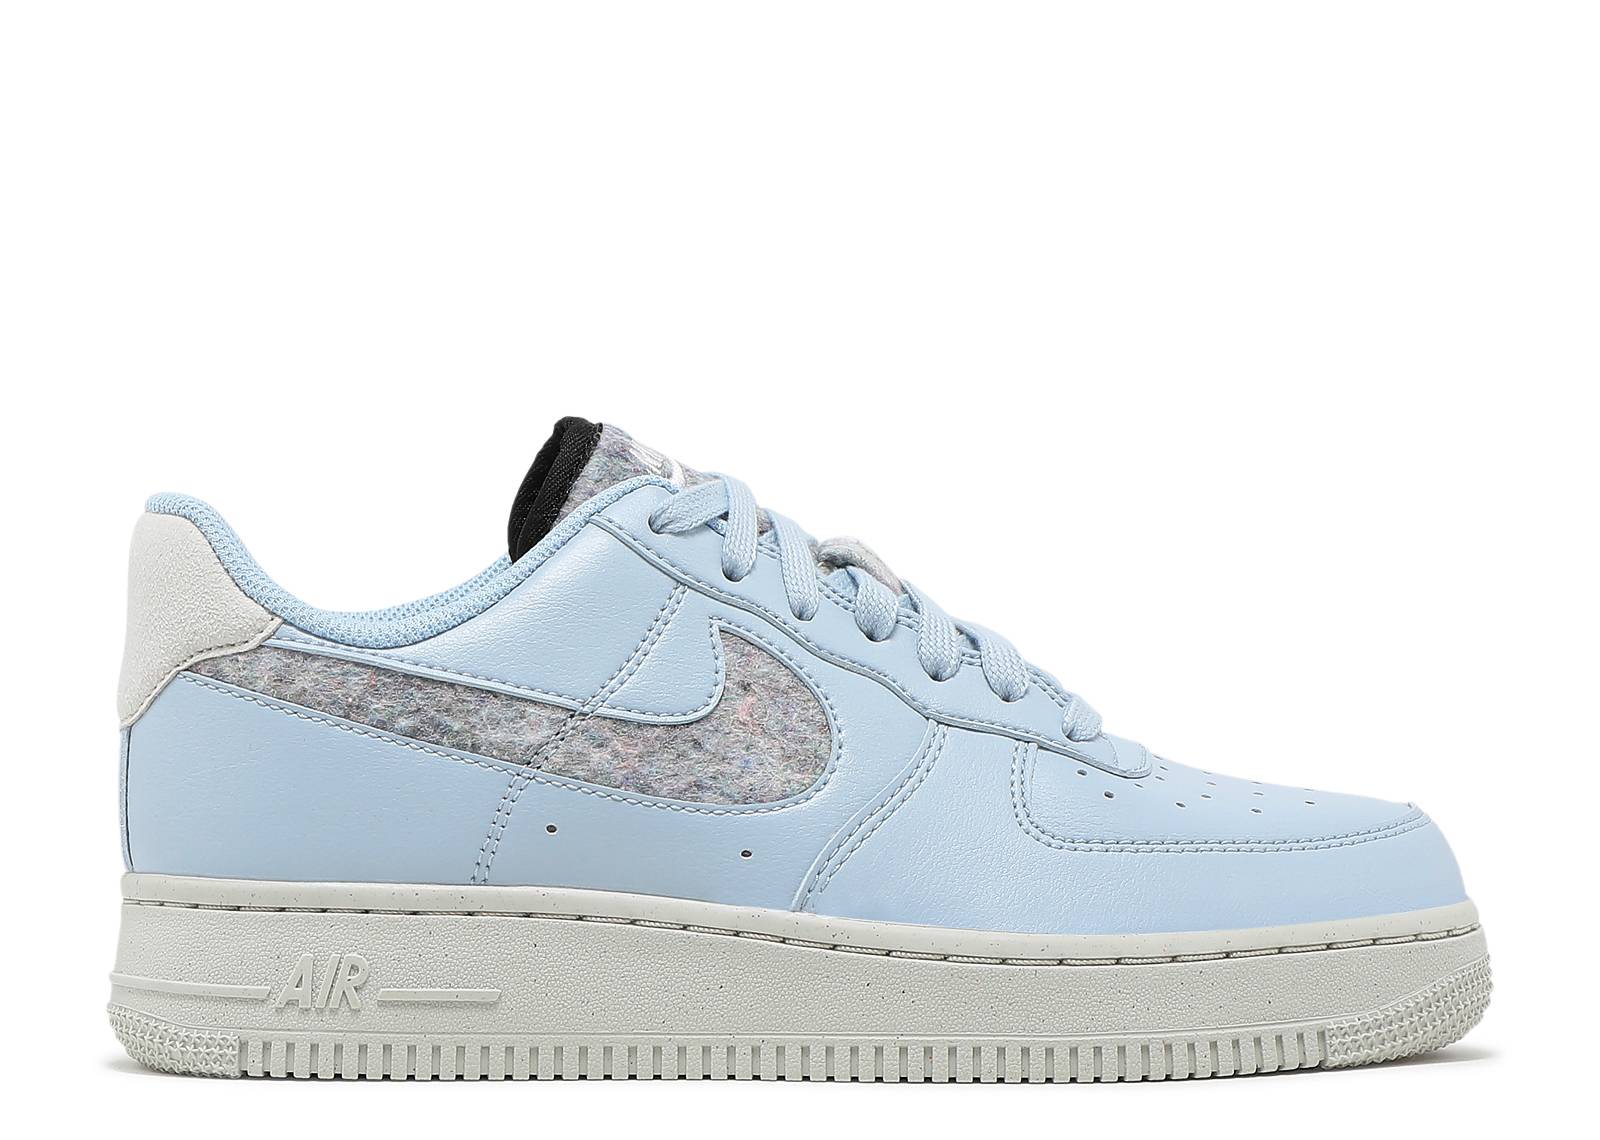 Wmns Air Force 1 '07 SE 'Recycled Wool Pack - Light Armory Blue'